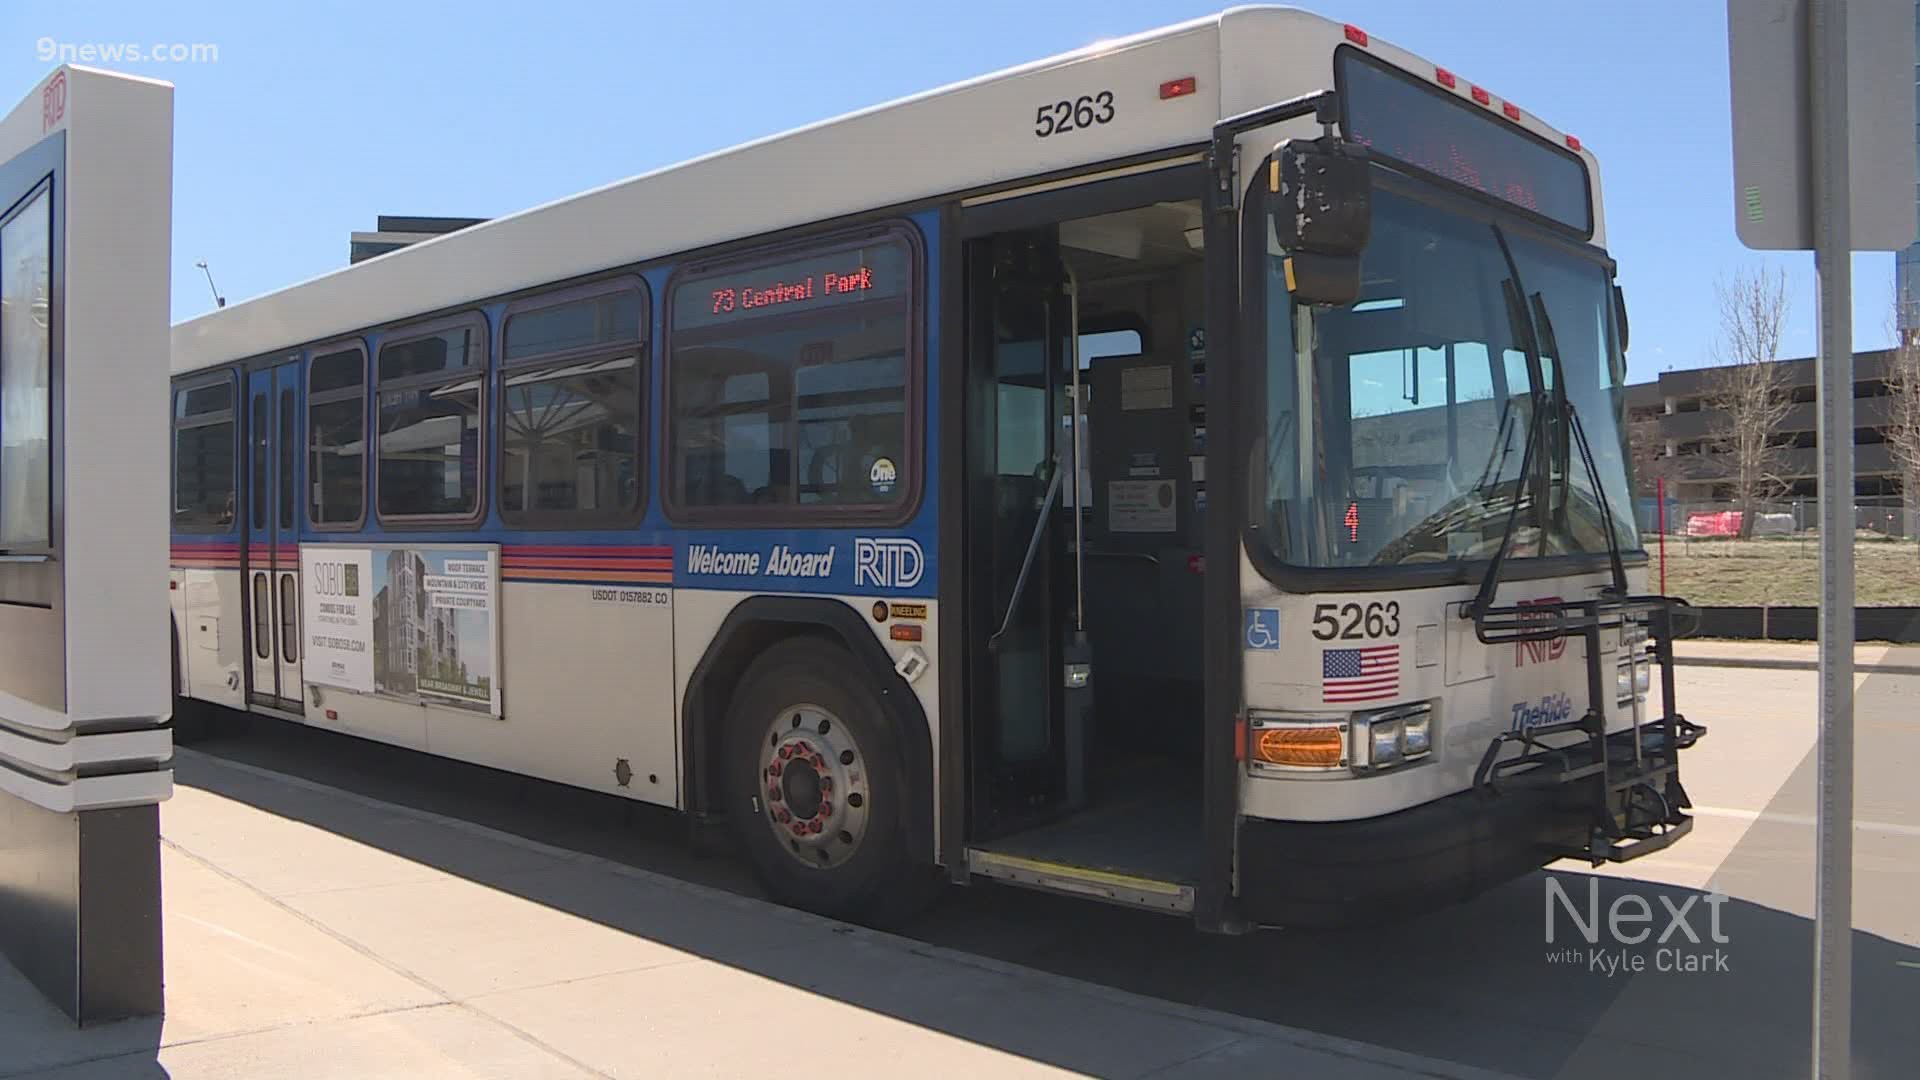 Gov. Jared Polis, D-Colorado, announced that a state-appointed committee will spend a year reviewing the Regional Transportation District and offer recommendations.